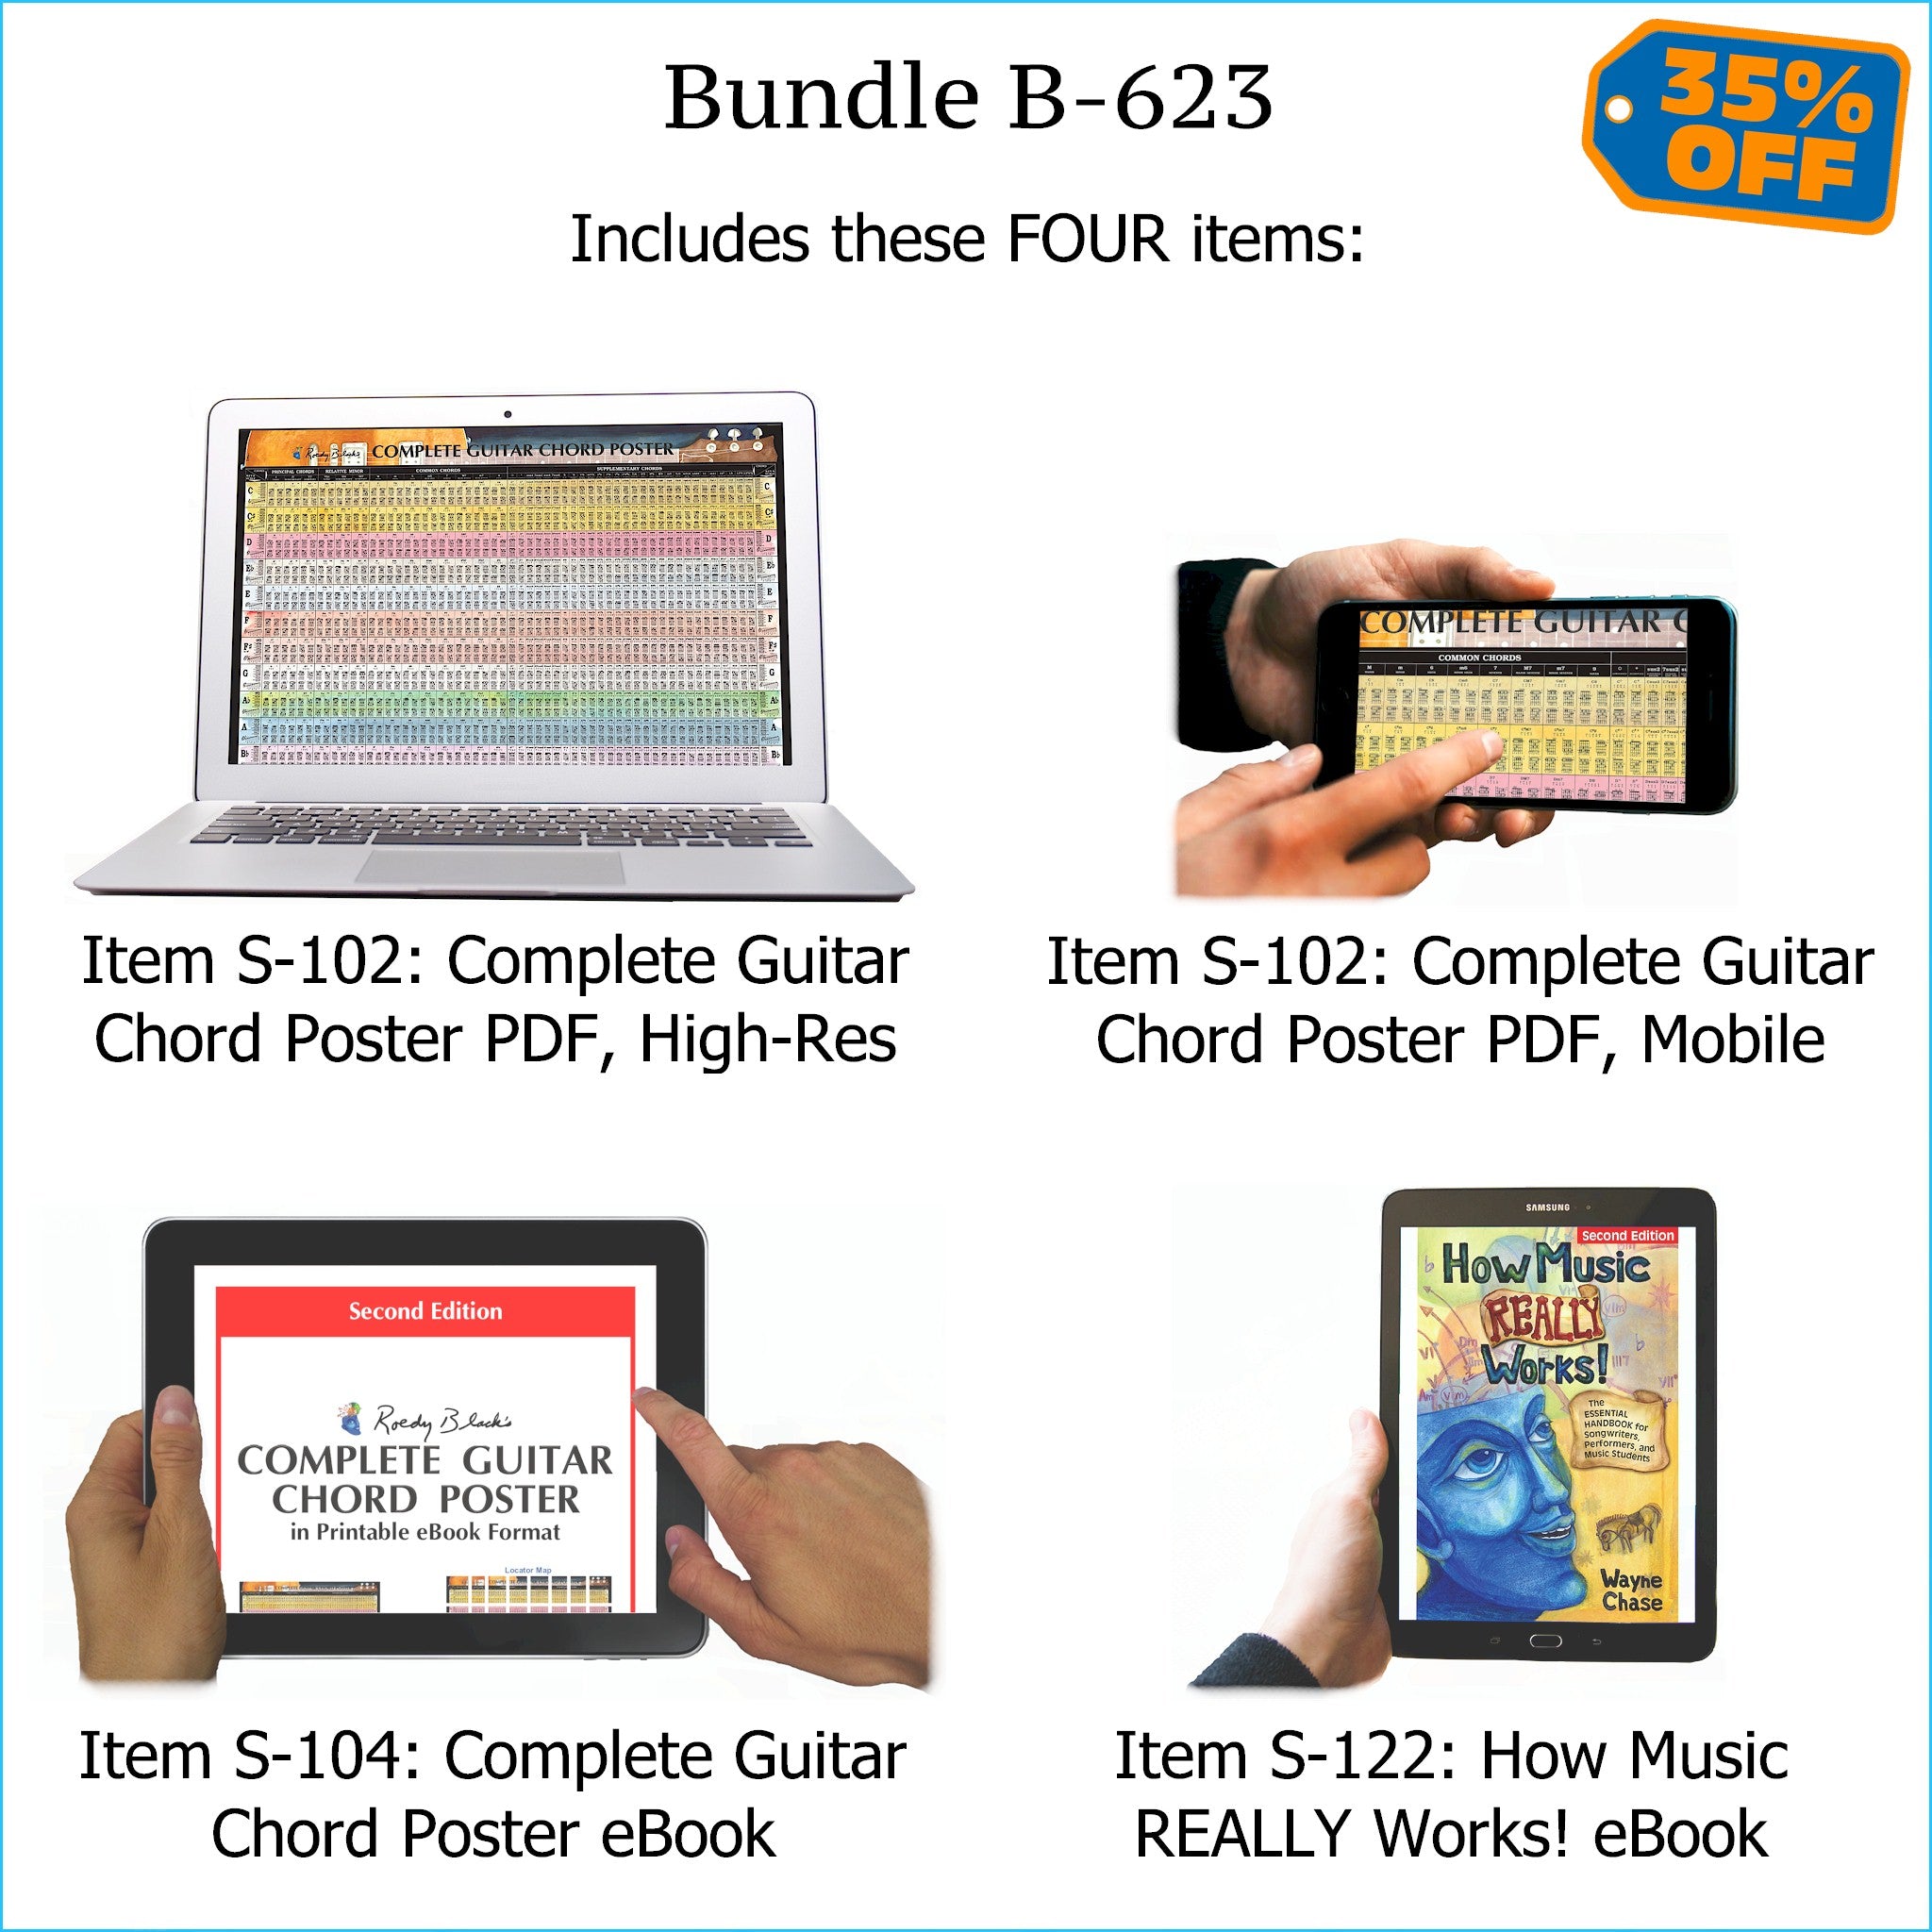 Bundle B-623: How Music REALLY Works! E-Book + Guitar Chords - E-Posters and Printable E-Book. FREE Download Protection.